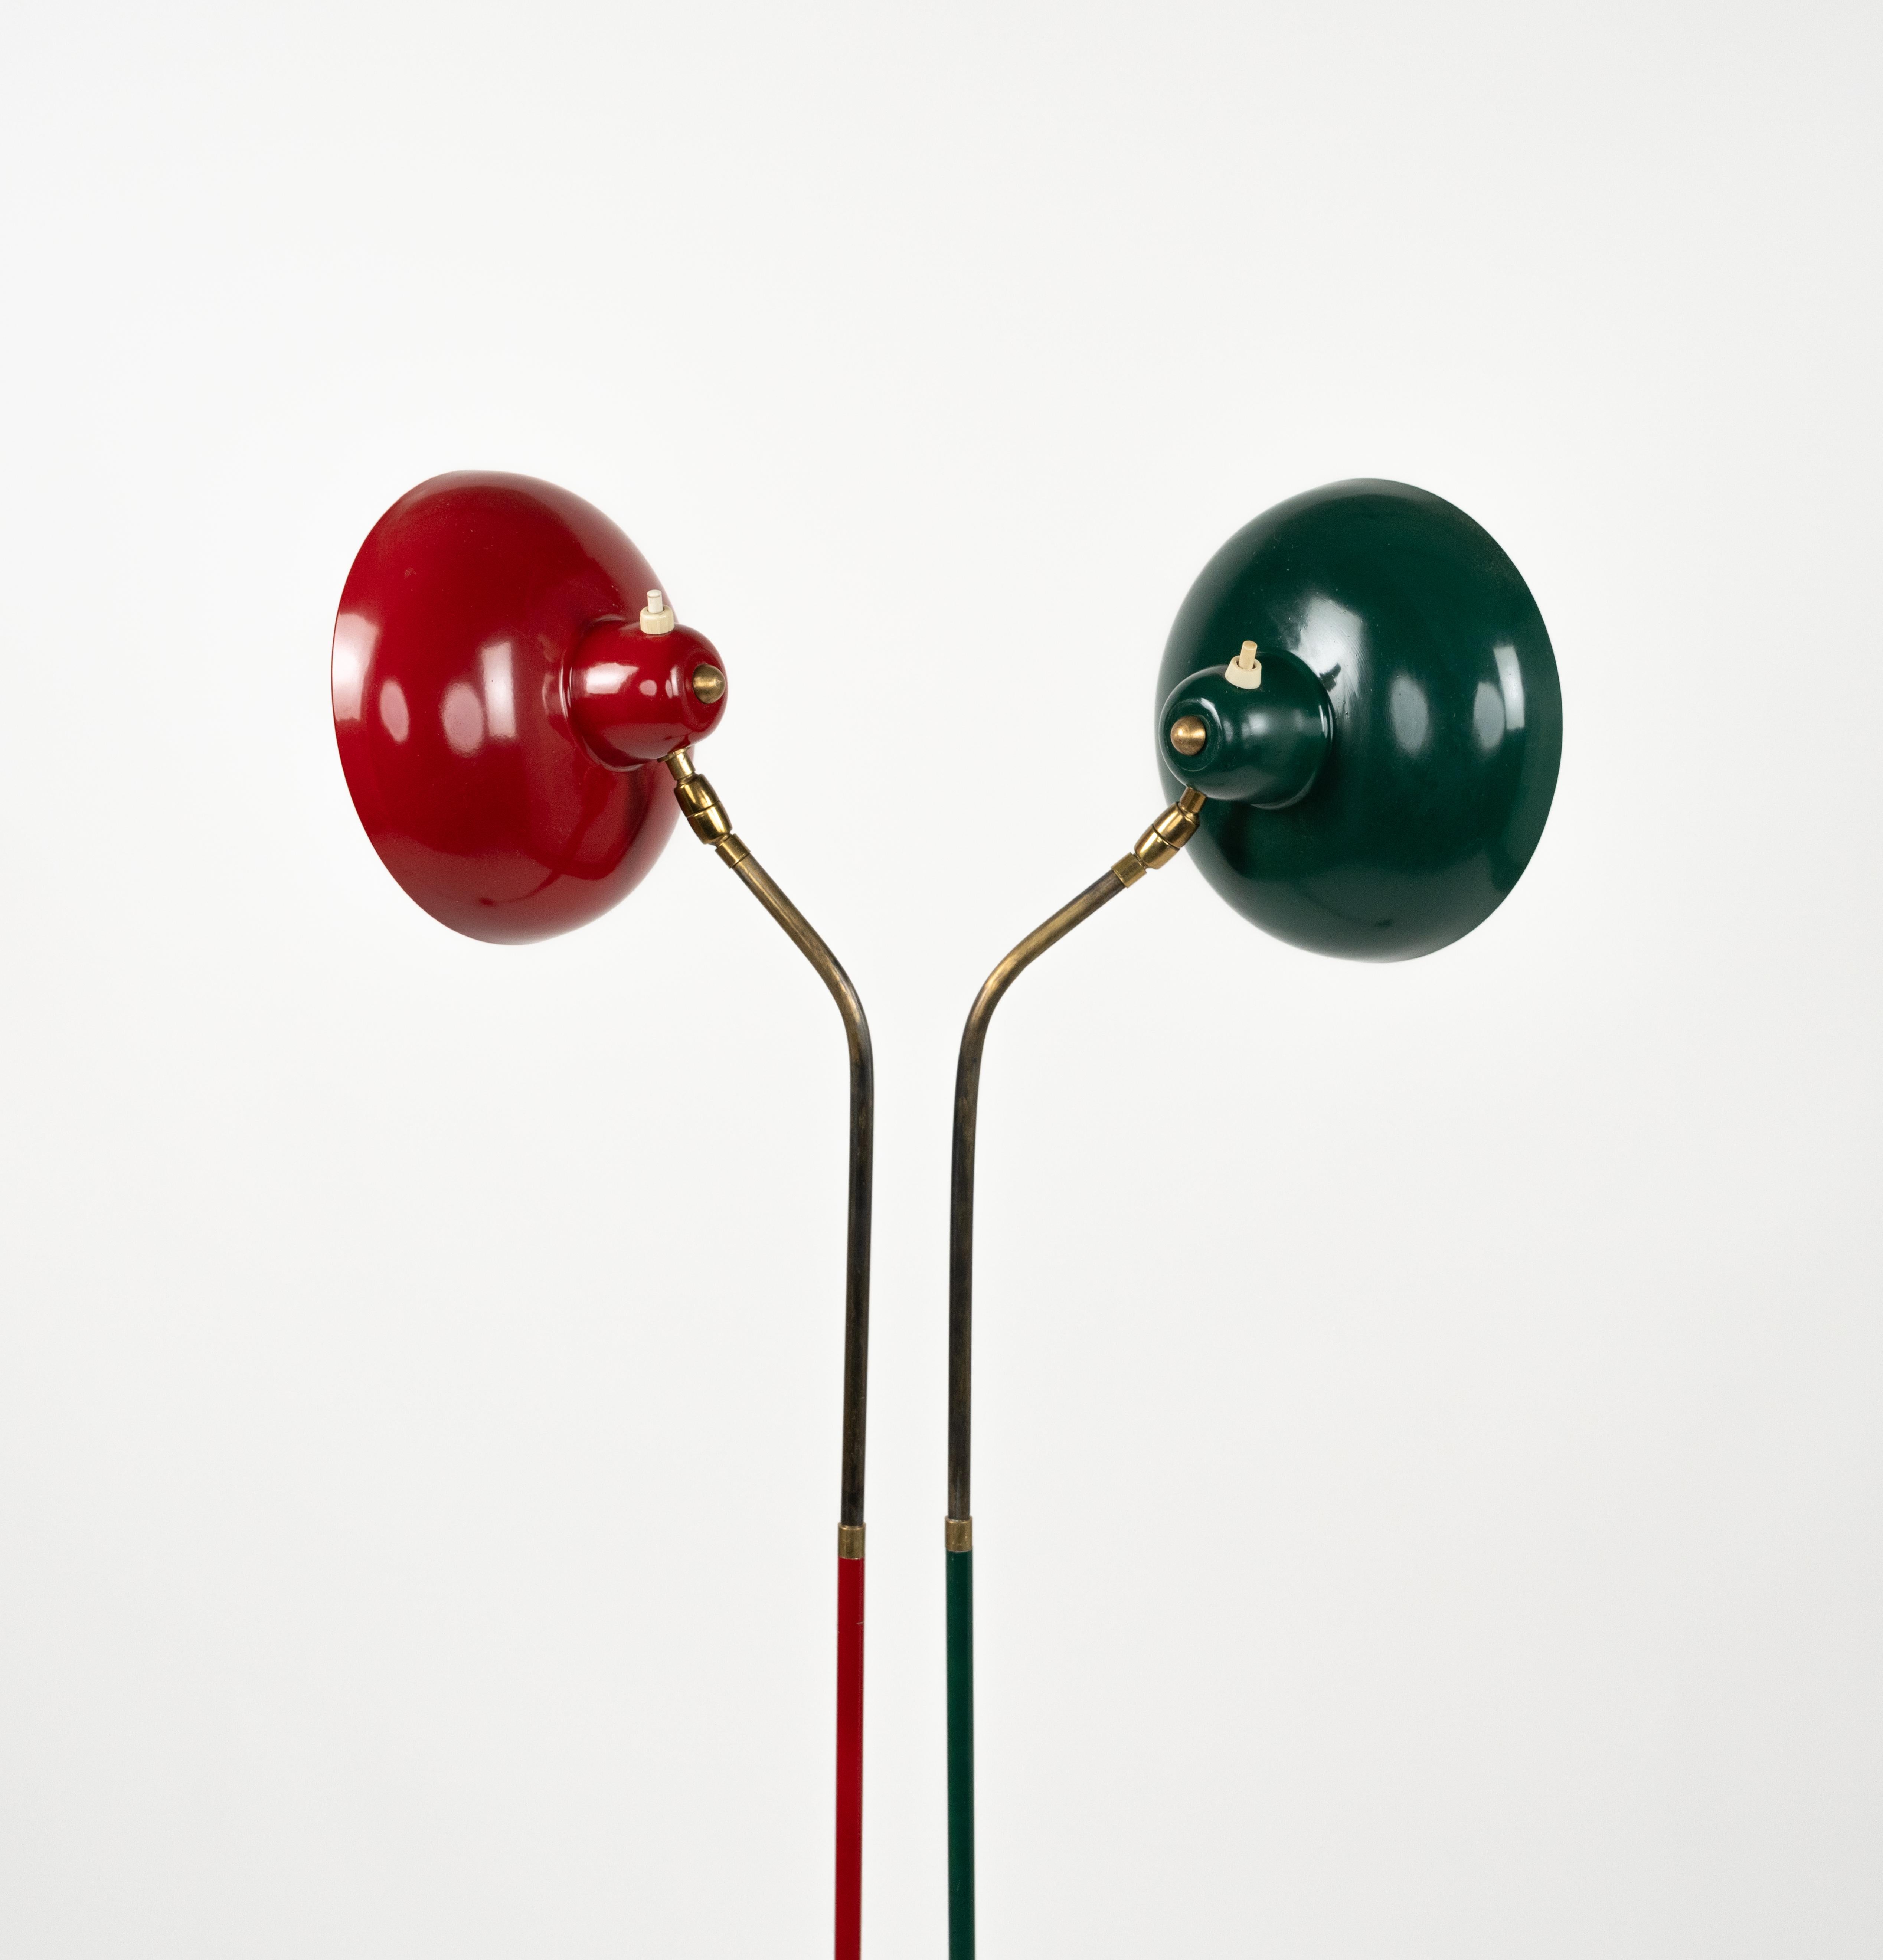 Floor Lamp in Marble, Lacquered Metal and Brass Stilnovo Style, Italy 1950s For Sale 5